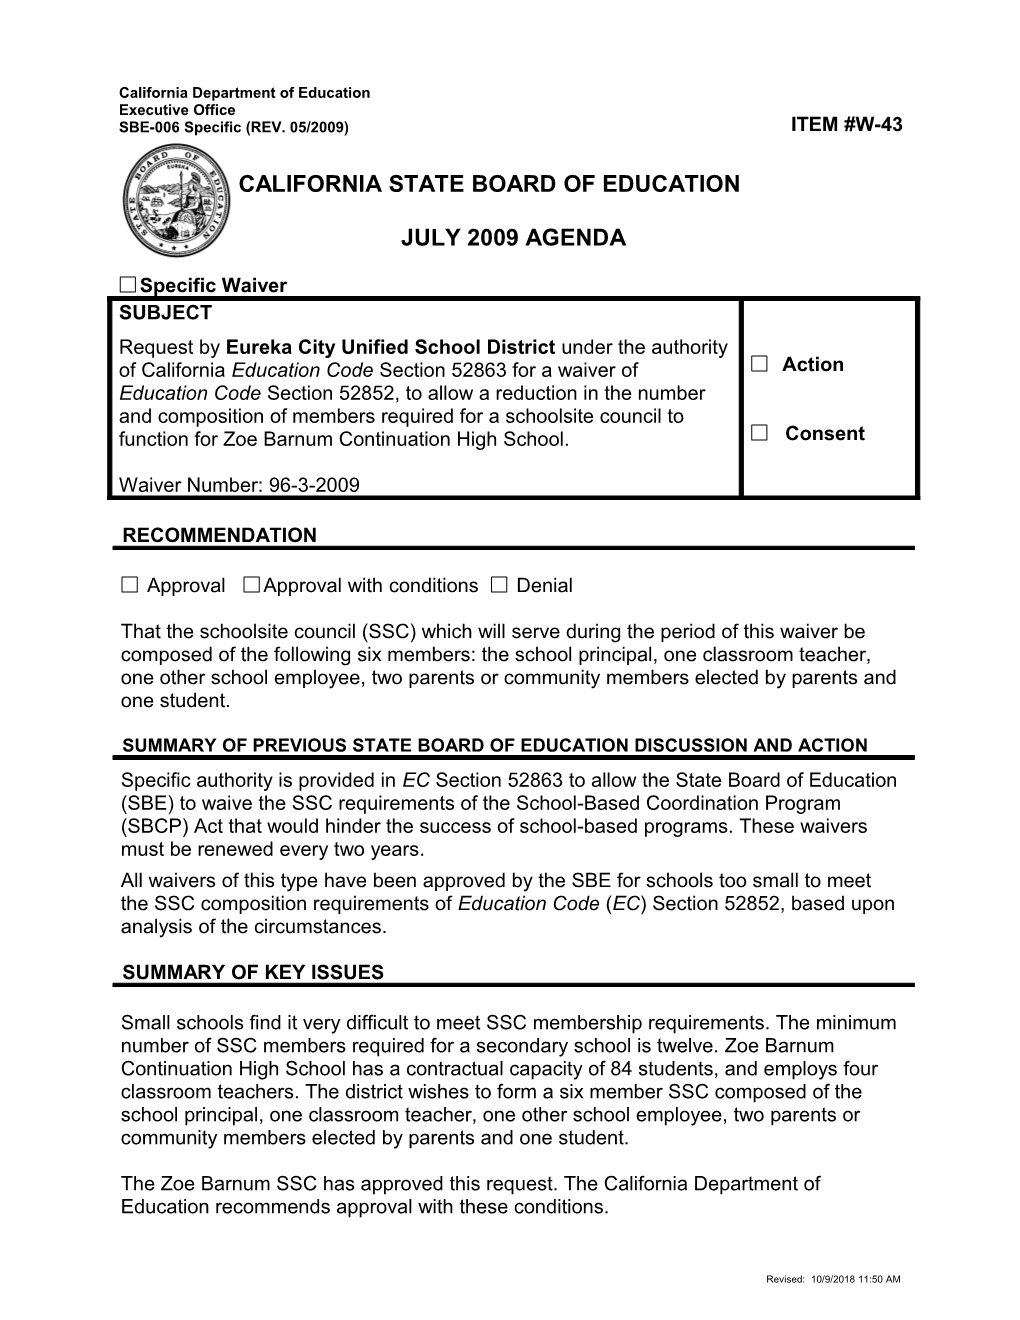 July 2009 Waiver Item W43 - Meeting Agendas (CA State Board of Education)